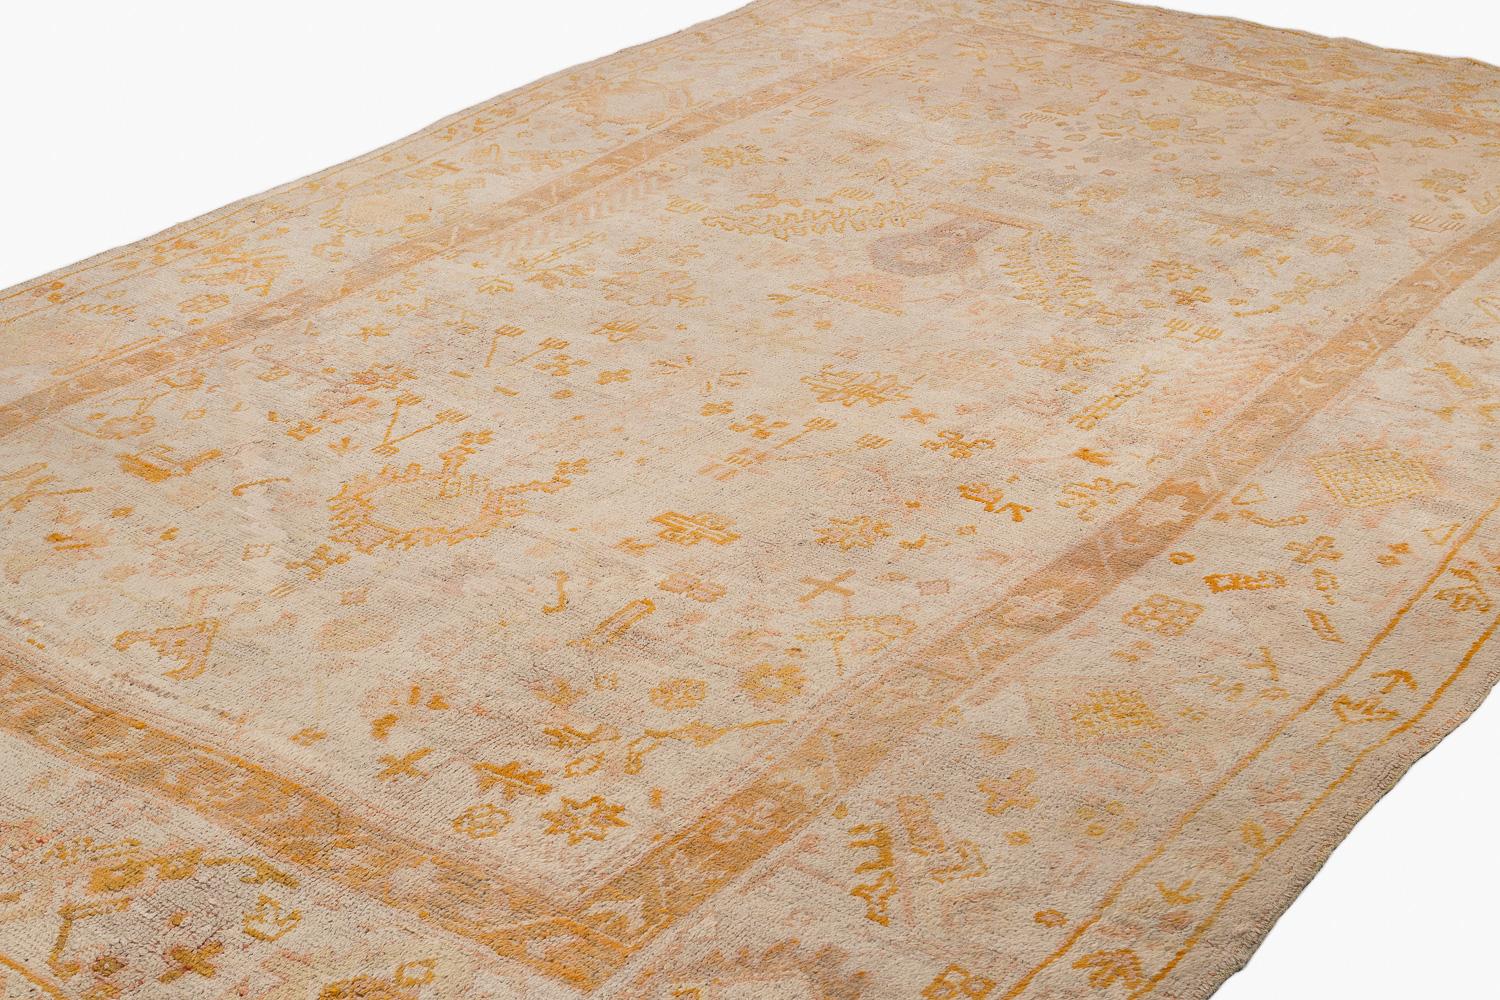 This antique Ouskak is an exceptional piece. This type of Oushak is very desirable based on the design and colors. The beautiful colors are very ethereal and subtle. For its age, this rug is in very good condition with very silky wool that is